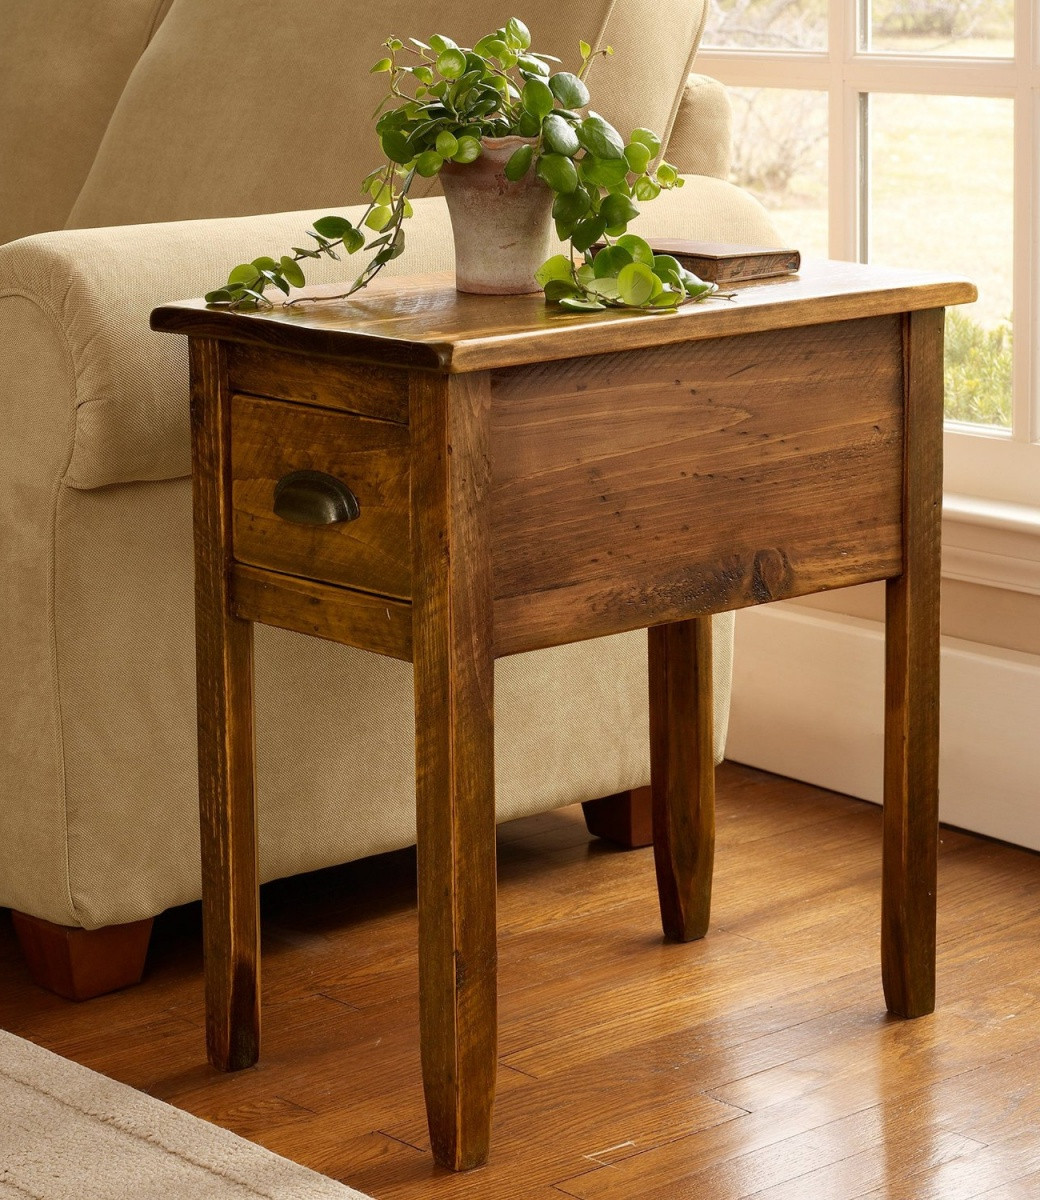 Side Table For Living Room
 Side Tables for Living Room Ideas for Small Spaces